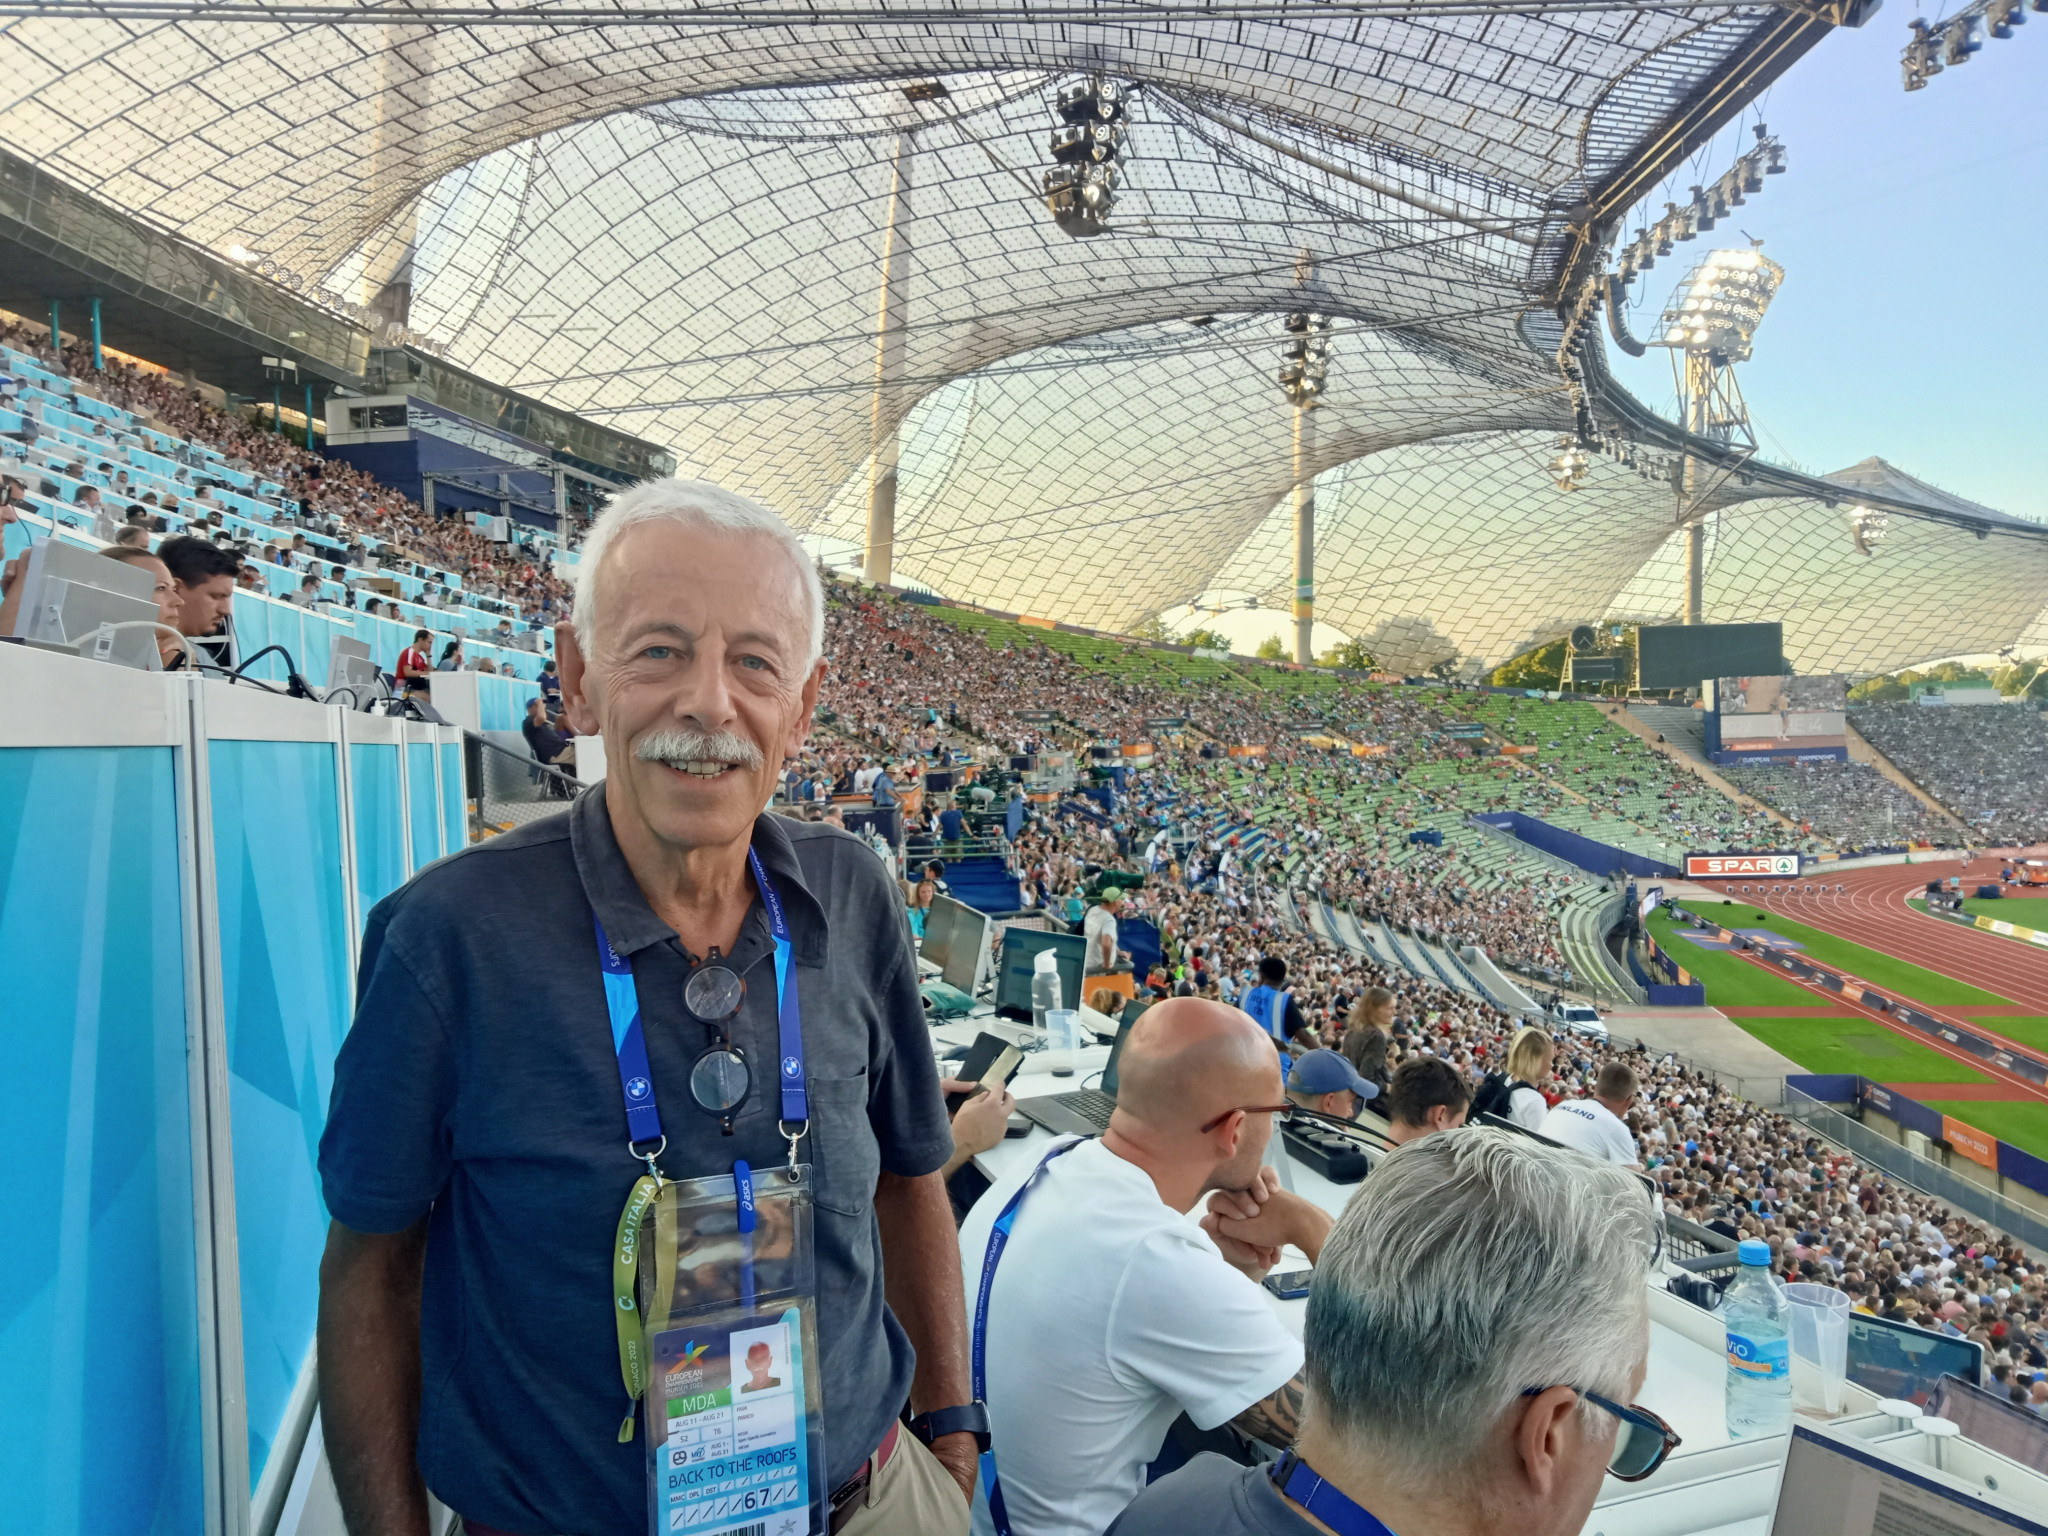 Franco Fava is back again at the Munich Olympic Stadium, as a journalist, 50 years after he competed there in the 1972 Olympic men's 3,000m steeplechase ©ITG